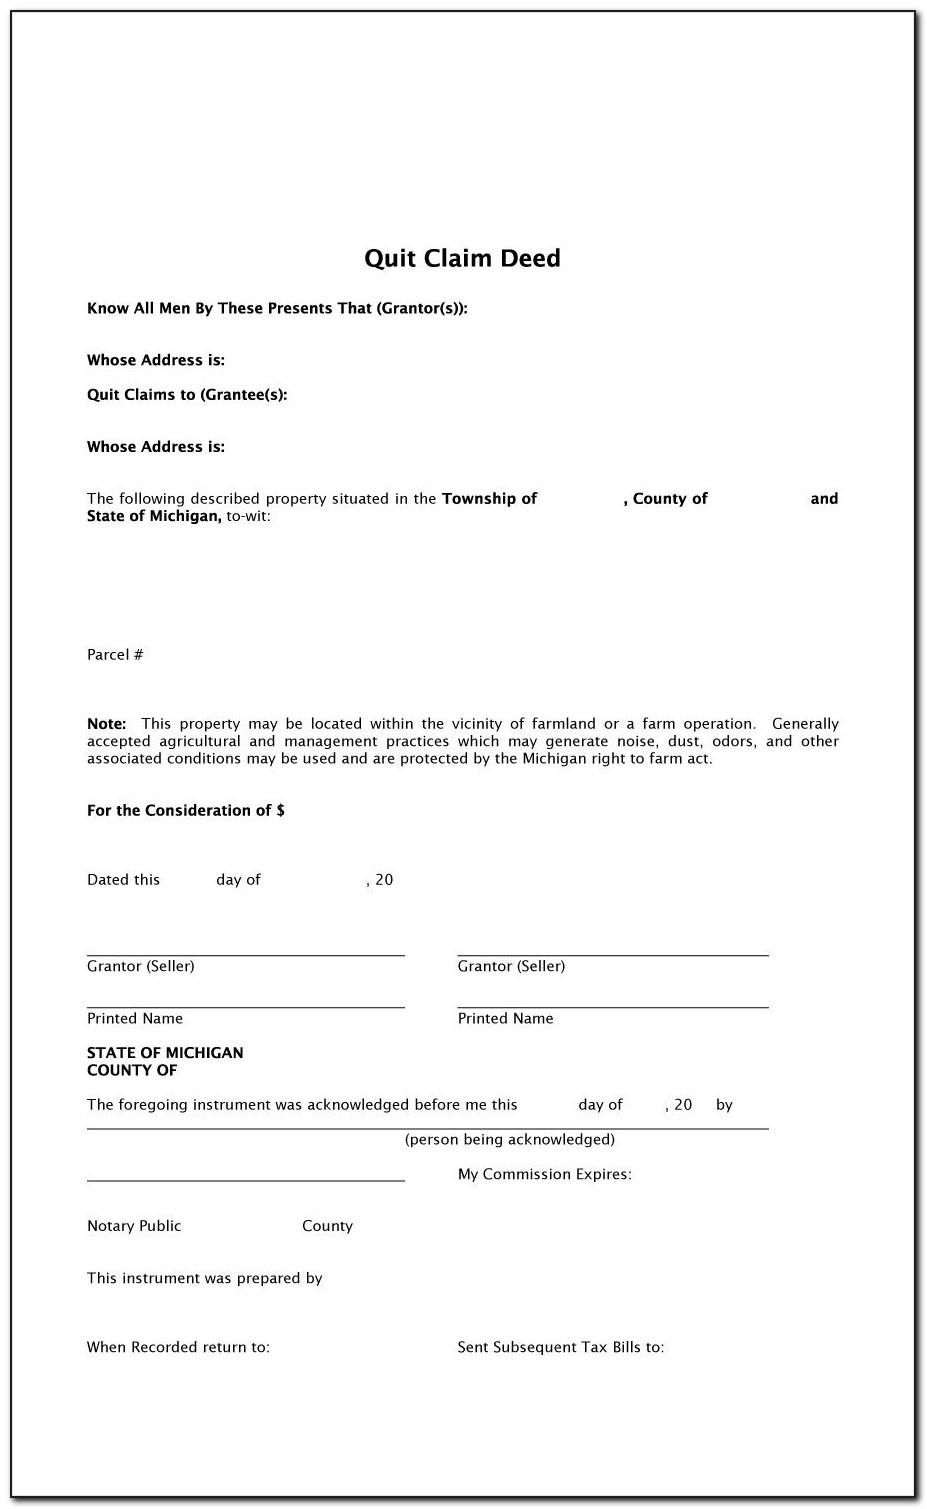 Quick Claim Deed Template Free